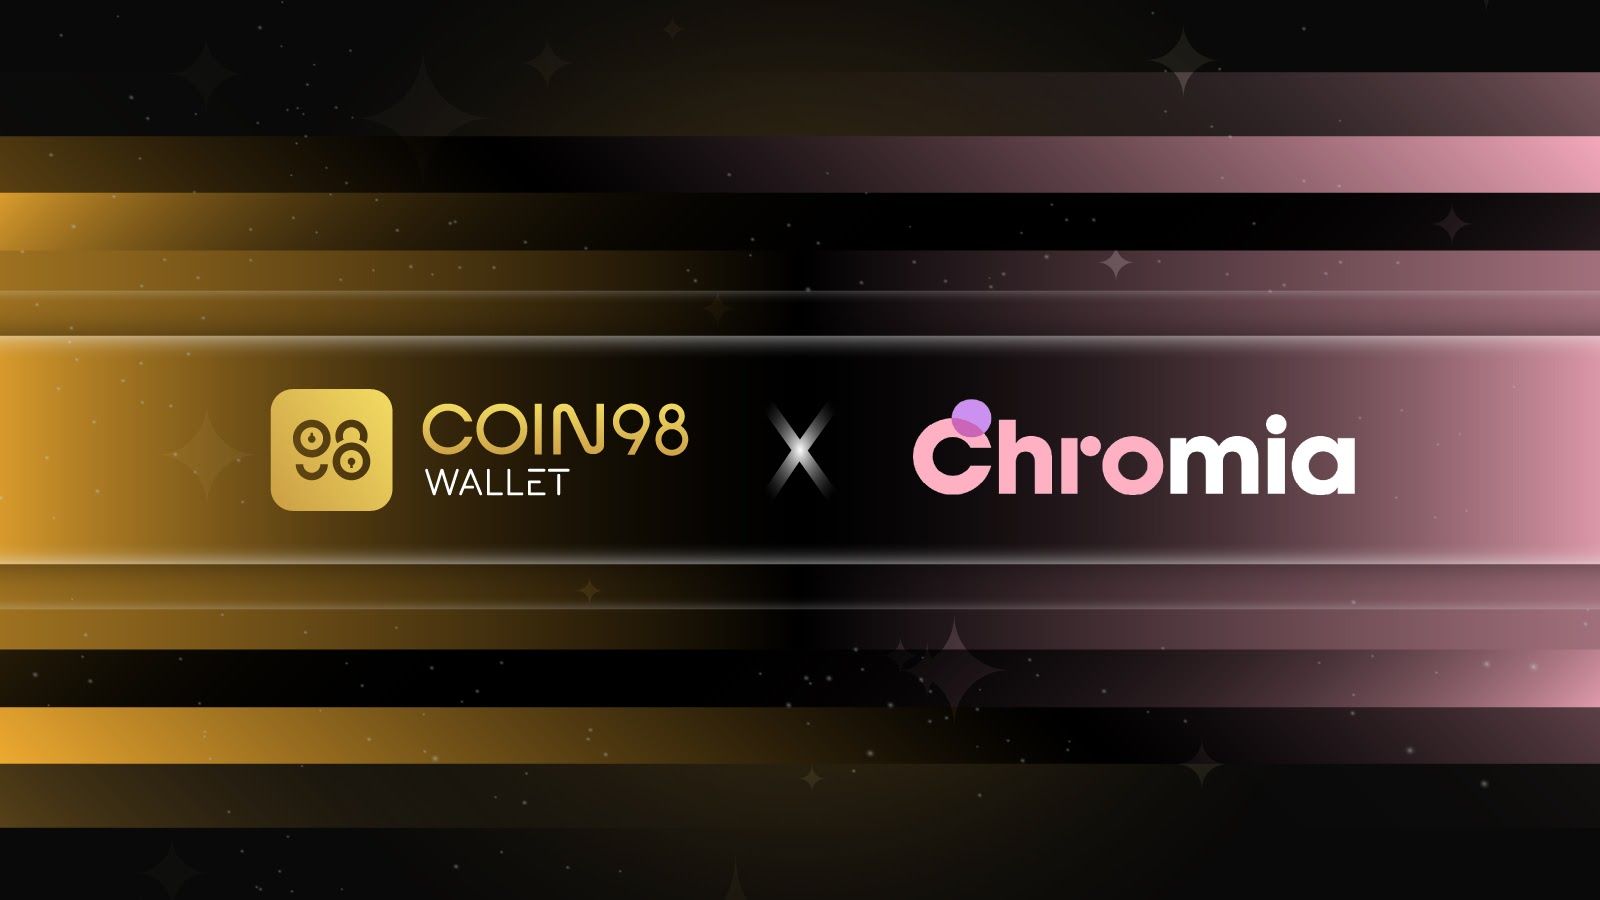 Coin98 Wallet partners with Chromia to develop DeFi through real-world sectors